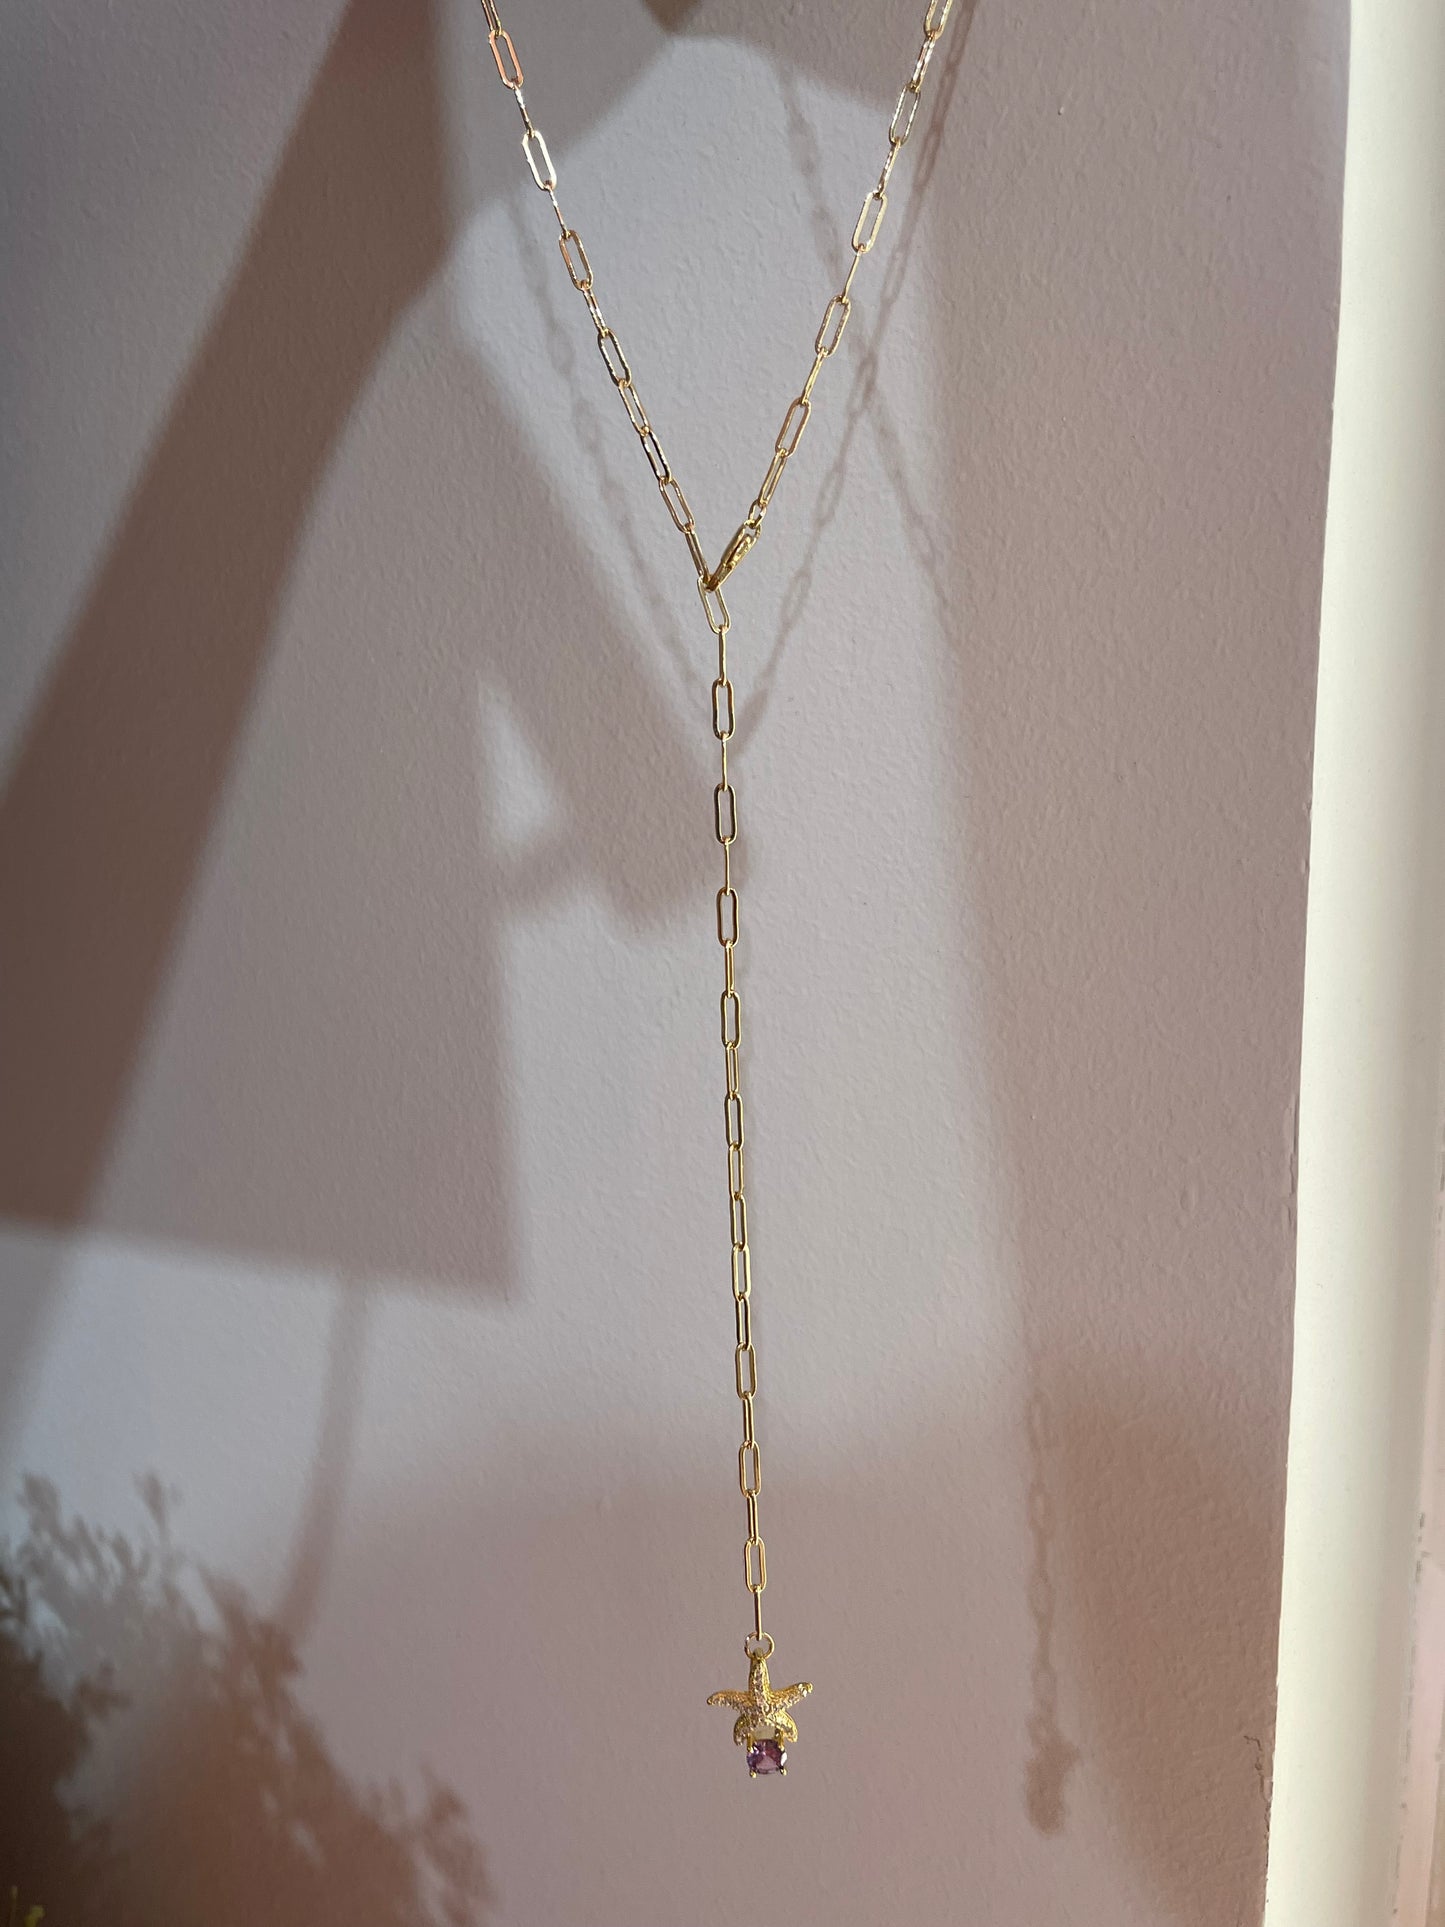 Starfish Chained Necklace- Gold Plated- Purple Stone